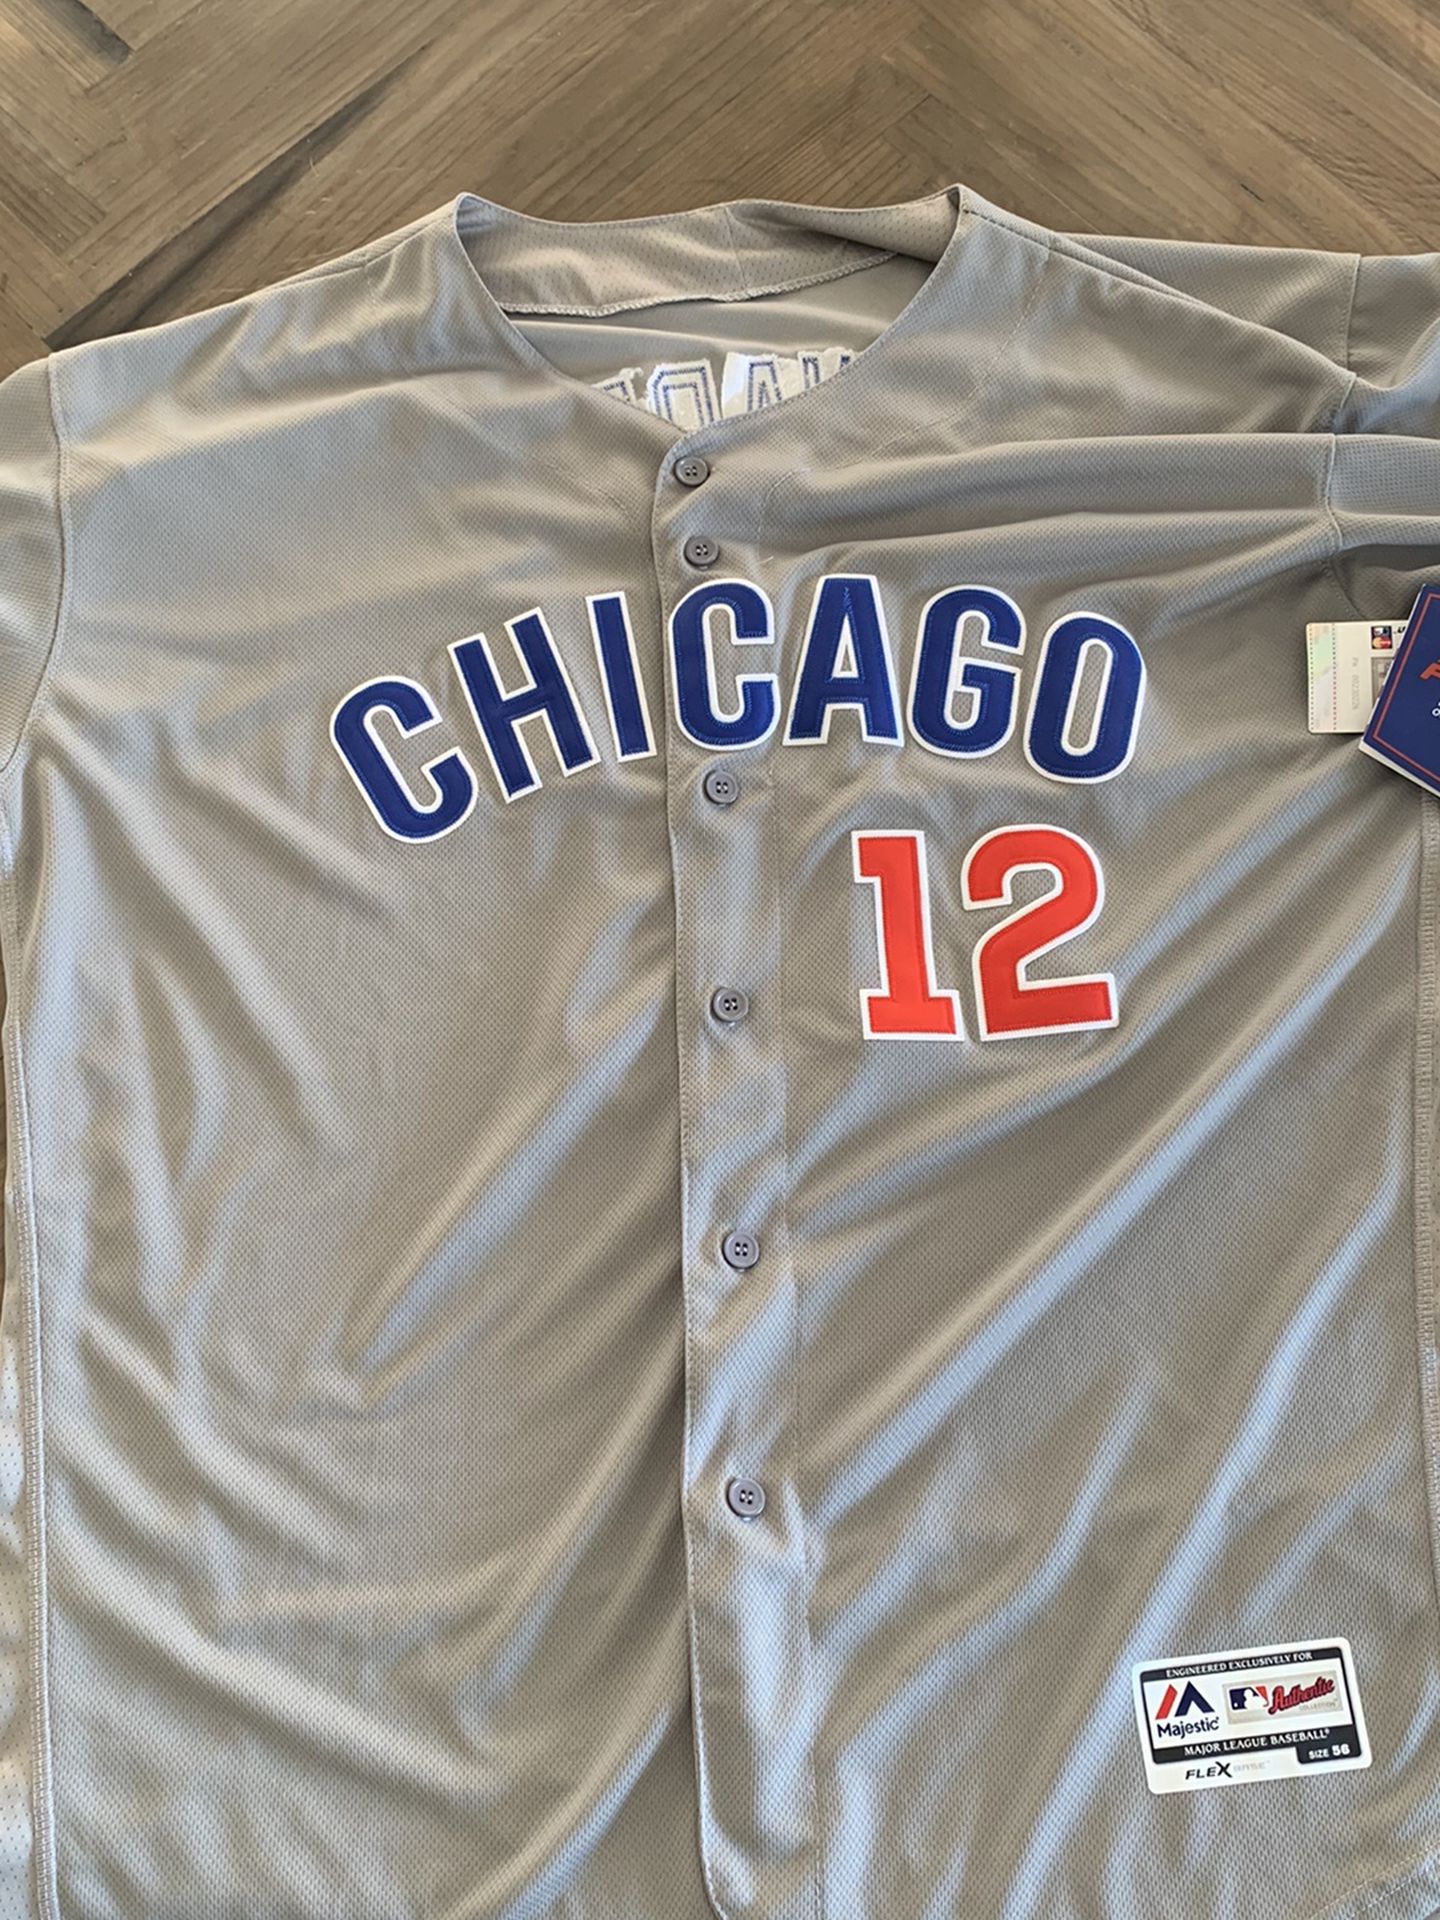 Chicago Cubs Schwarber Jersey NWT